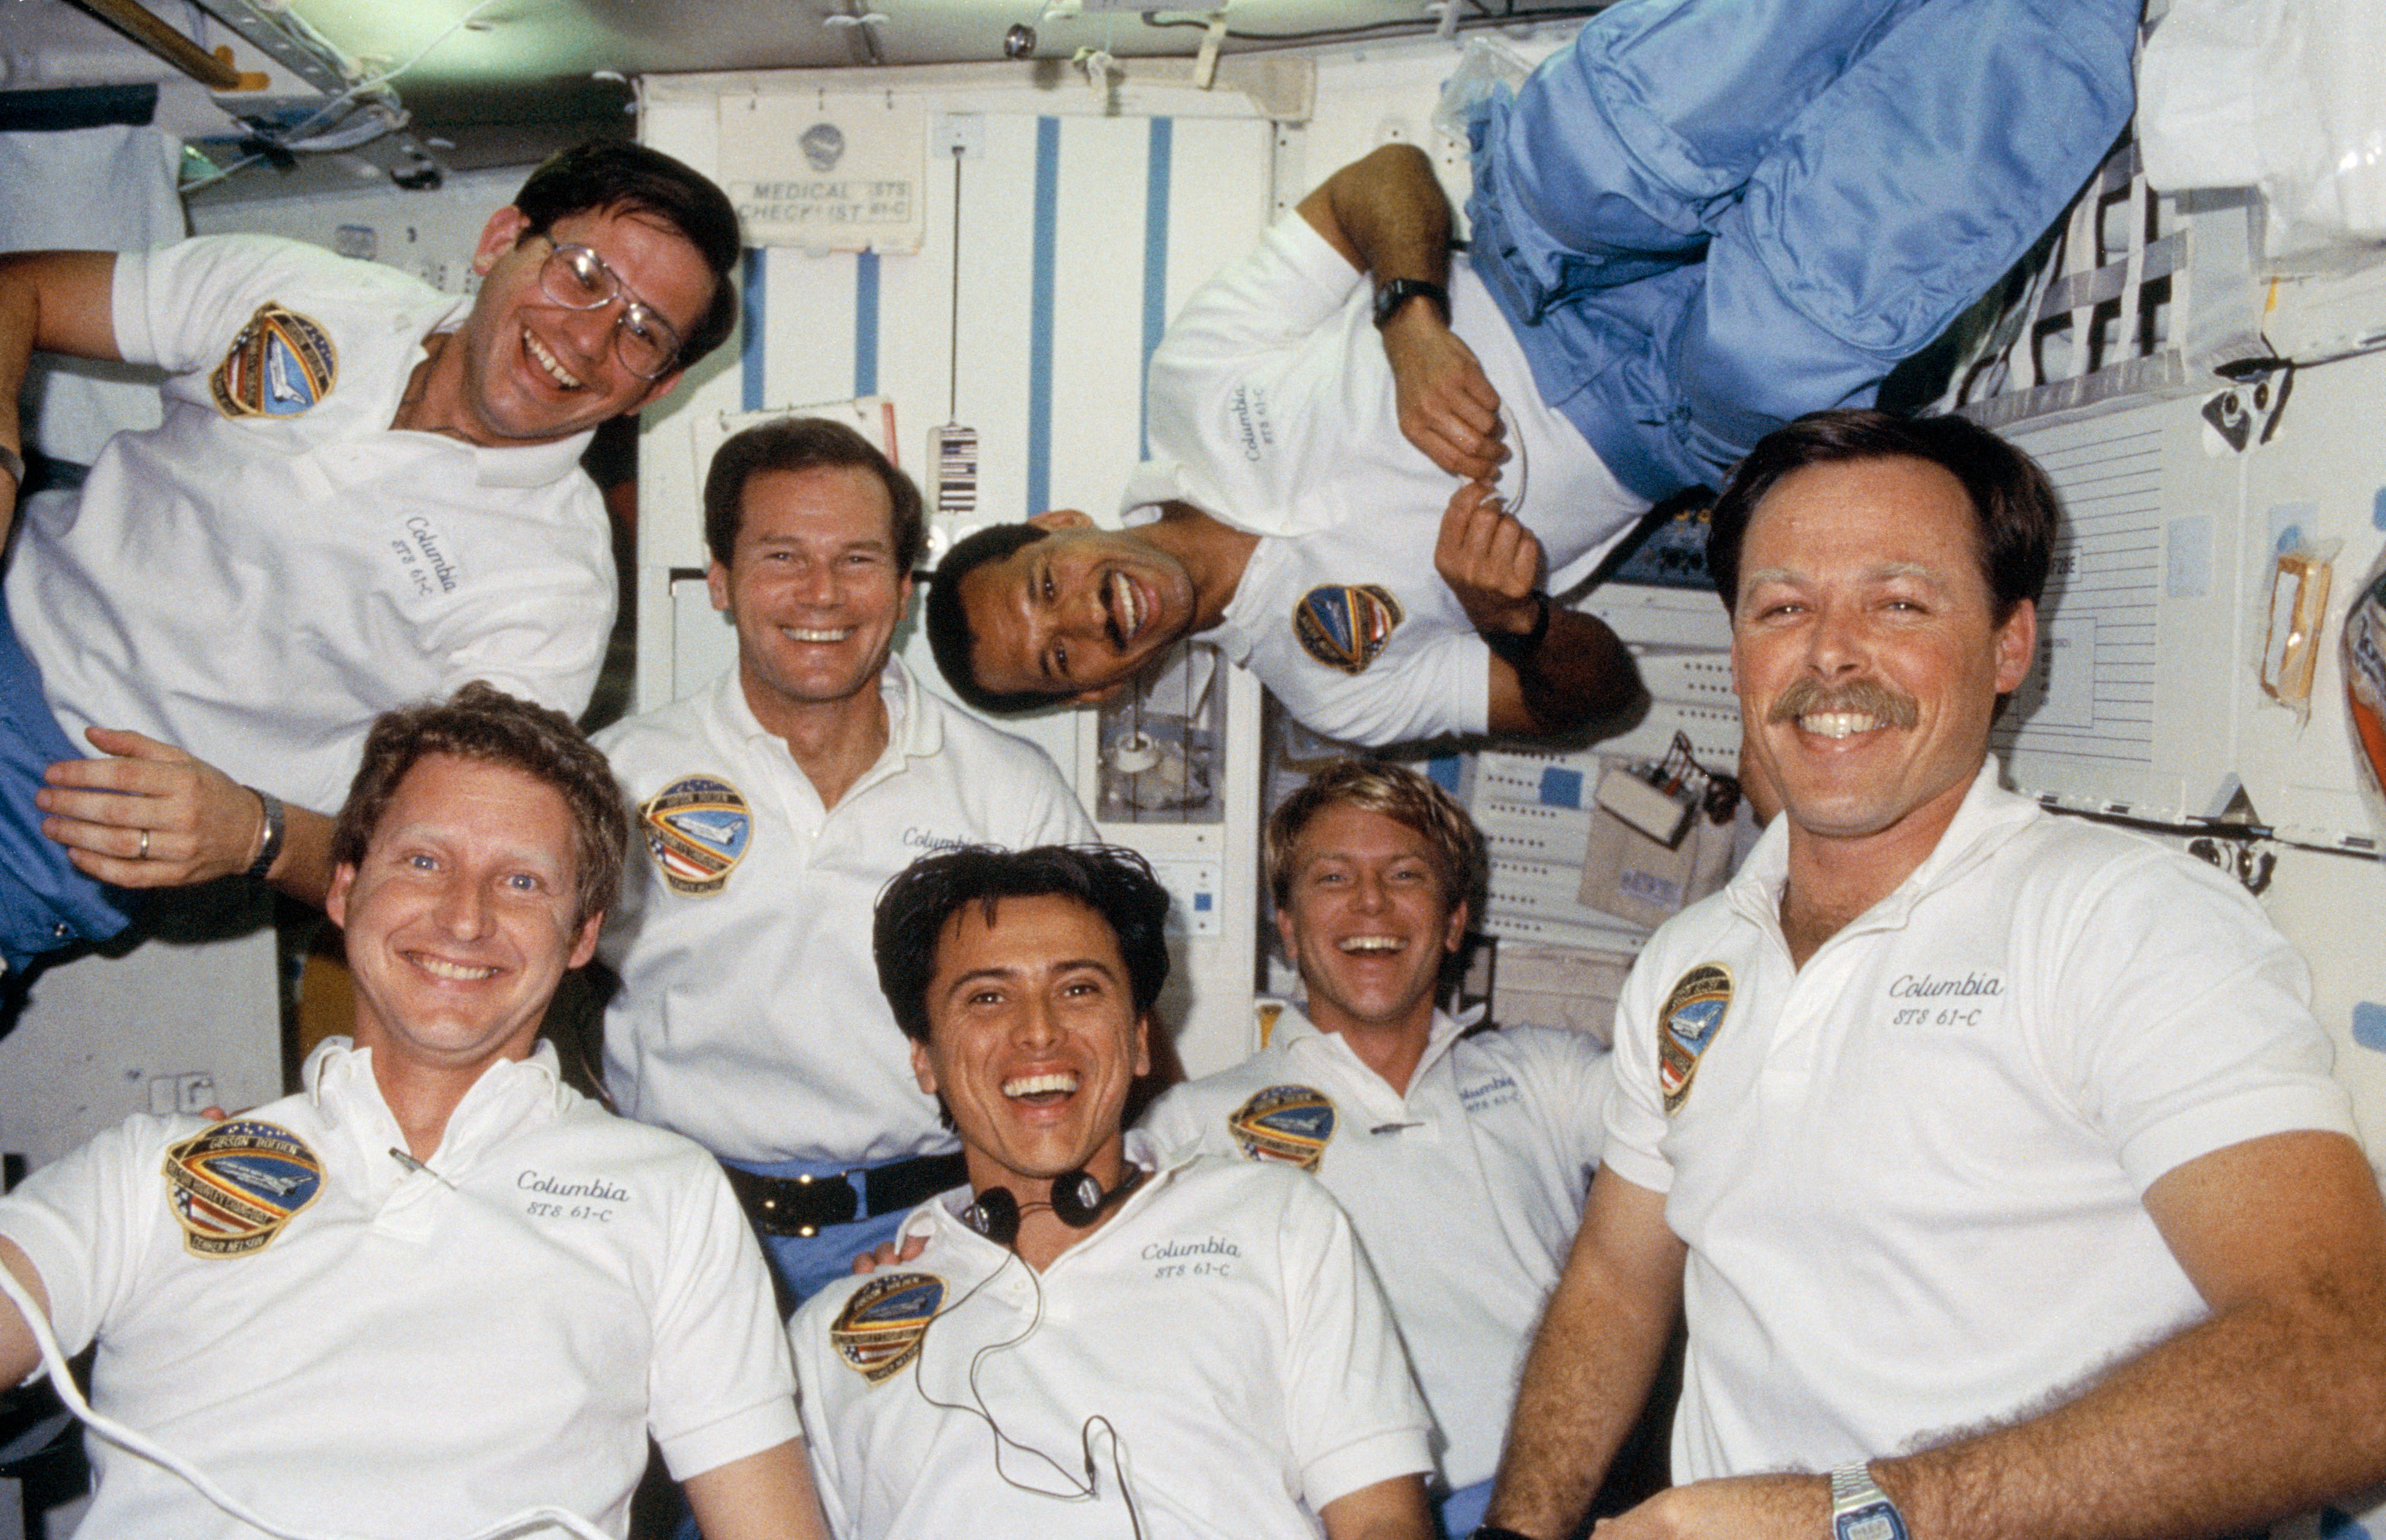 Franklin R. Chang-Díaz, center, the first Hispanic American astronaut, with his fellow STS-61C crew members